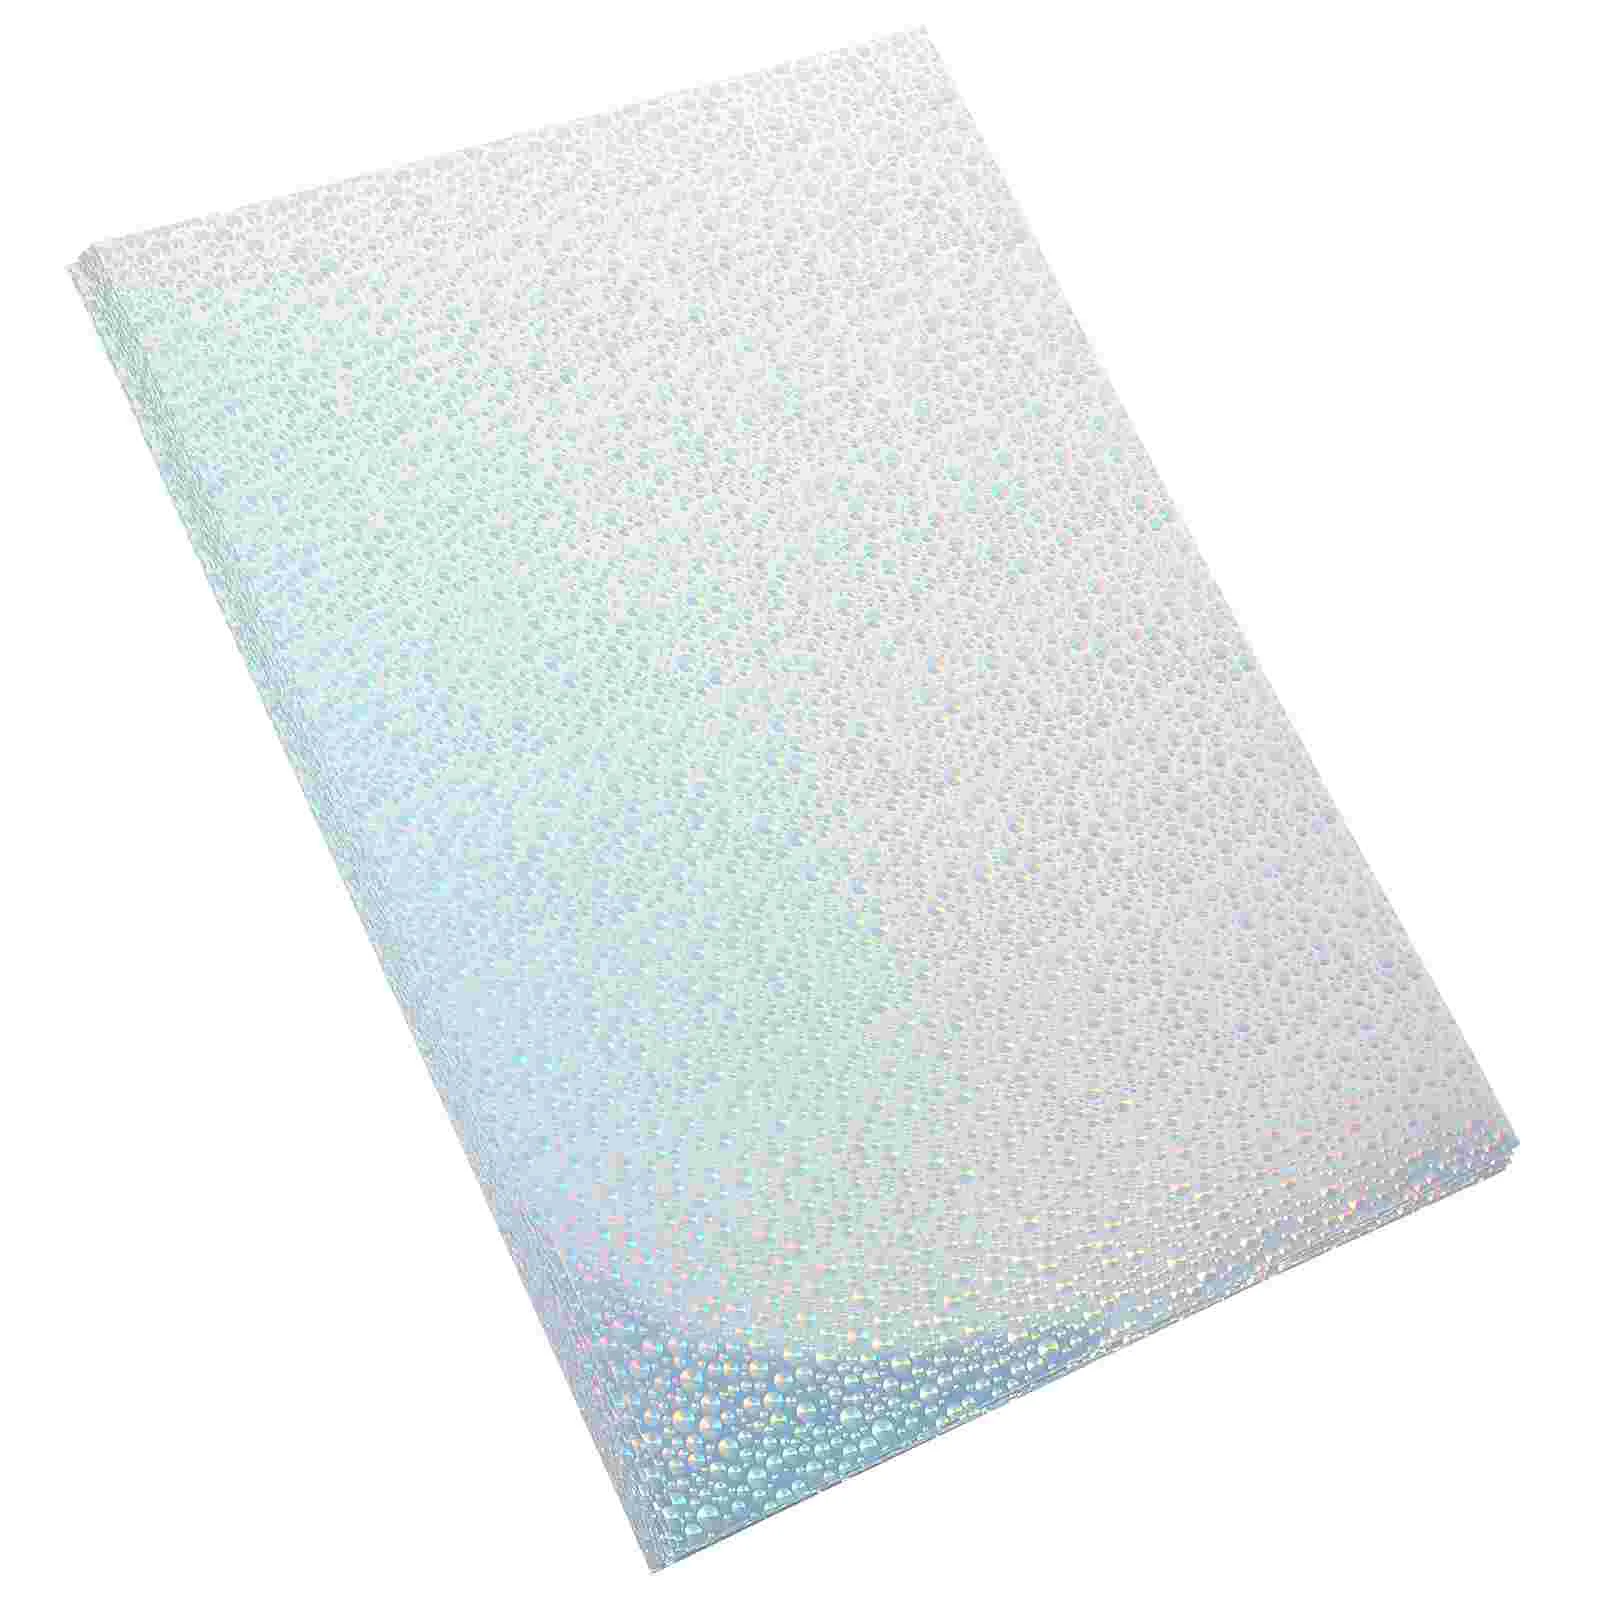 

20 Sheets Holographic Printing Paper Large Mailing Labels Sticker Printer Laser Pvc Self-adhesive for